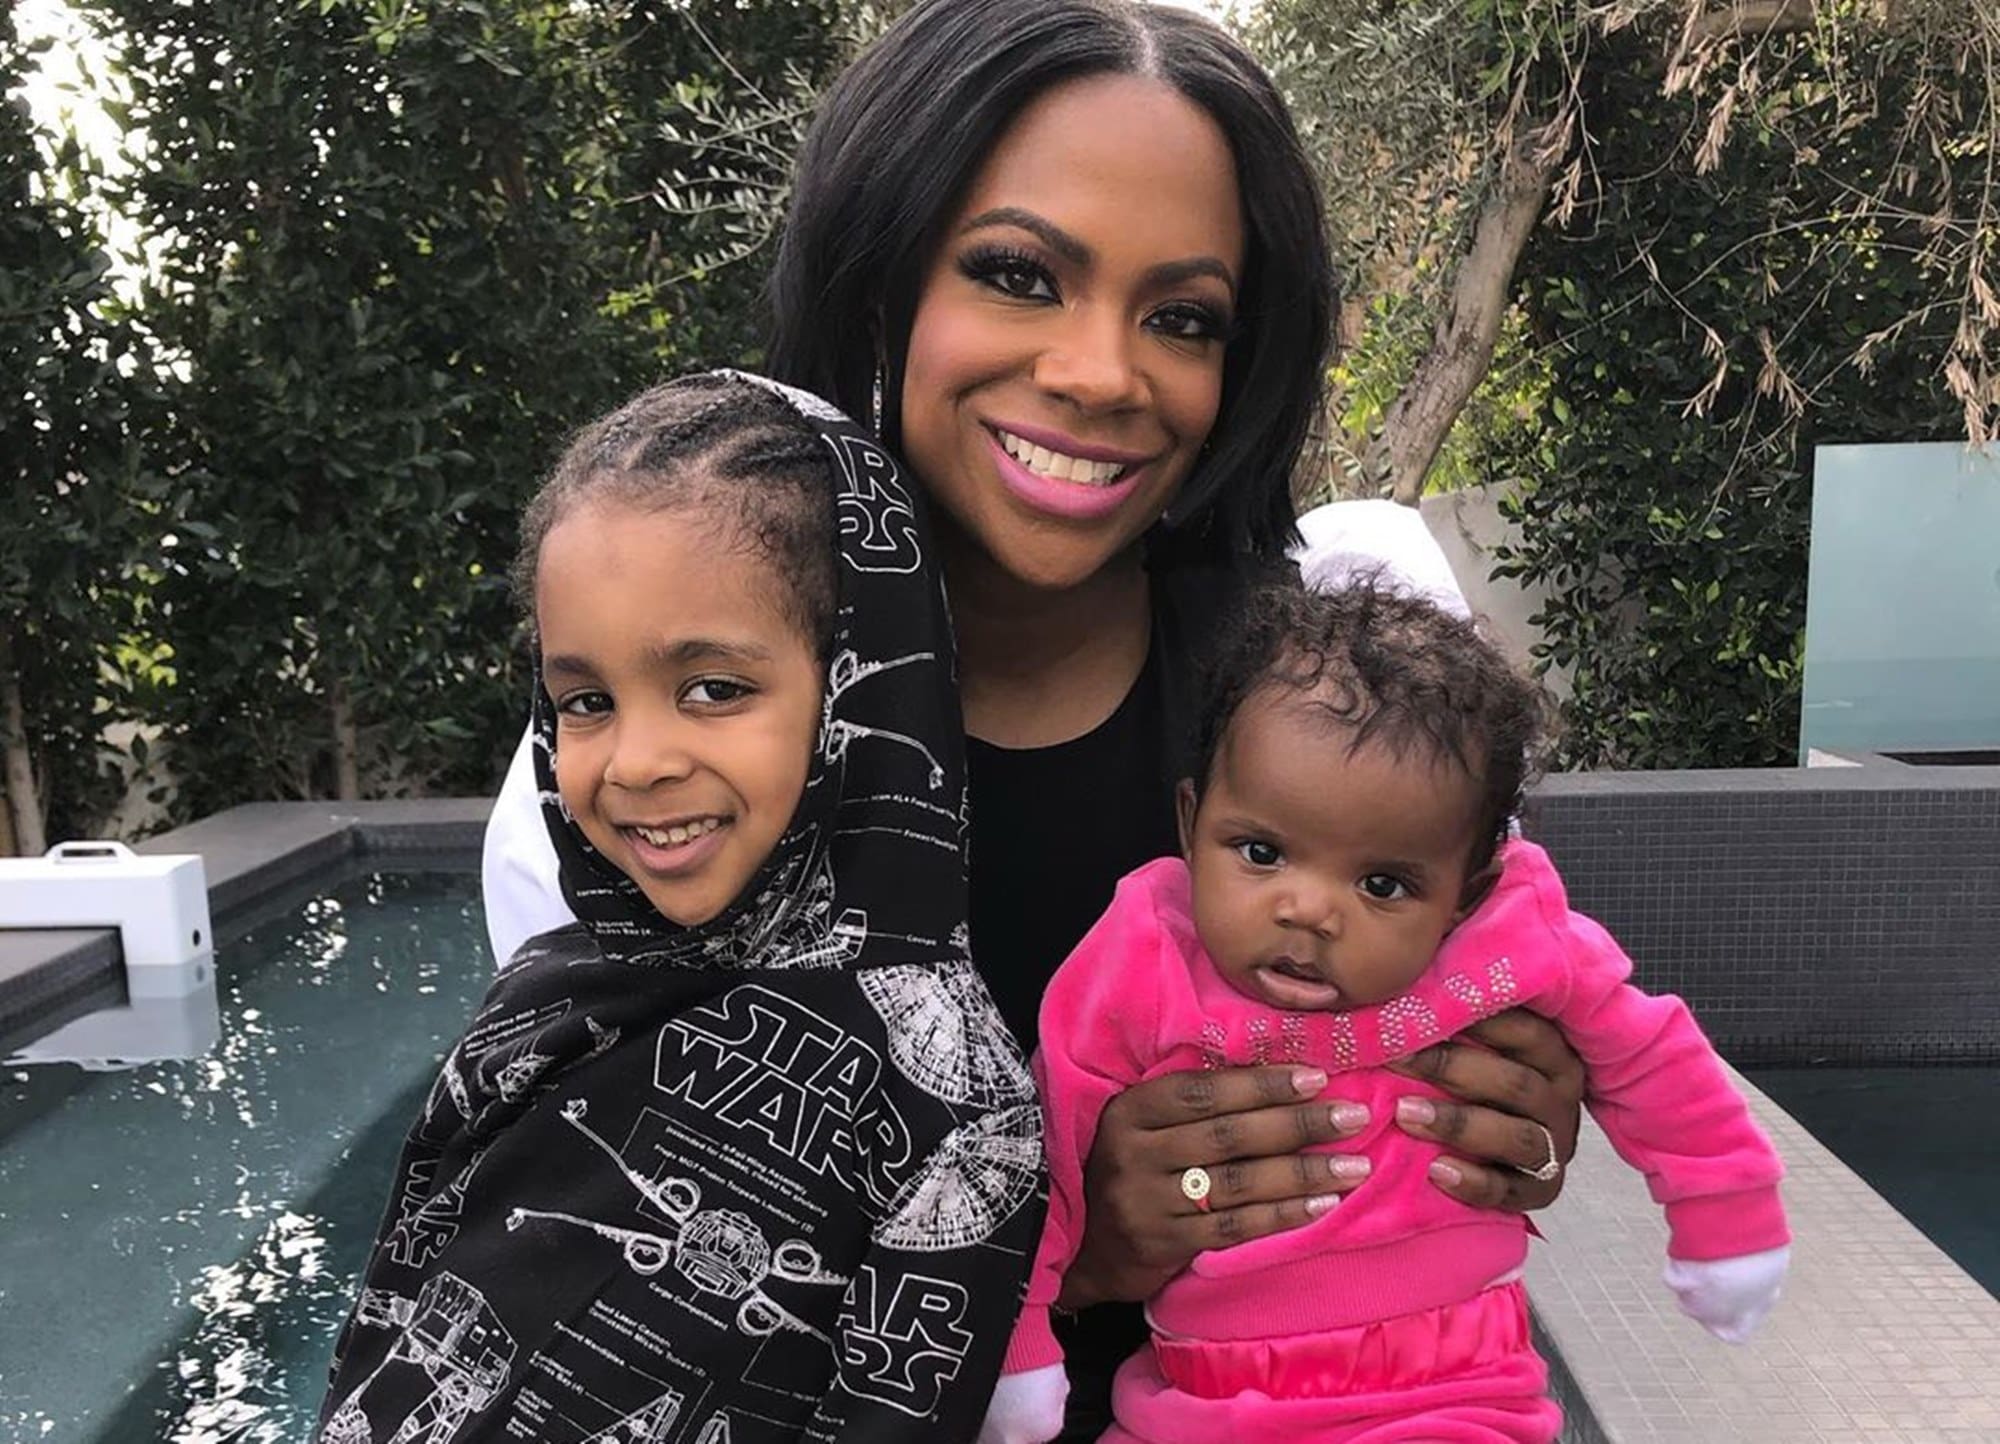 Kandi Burruss Shares New Pics Of Her Baby Girl, Blaze Tucker, Smiling And Fans Are In Awe